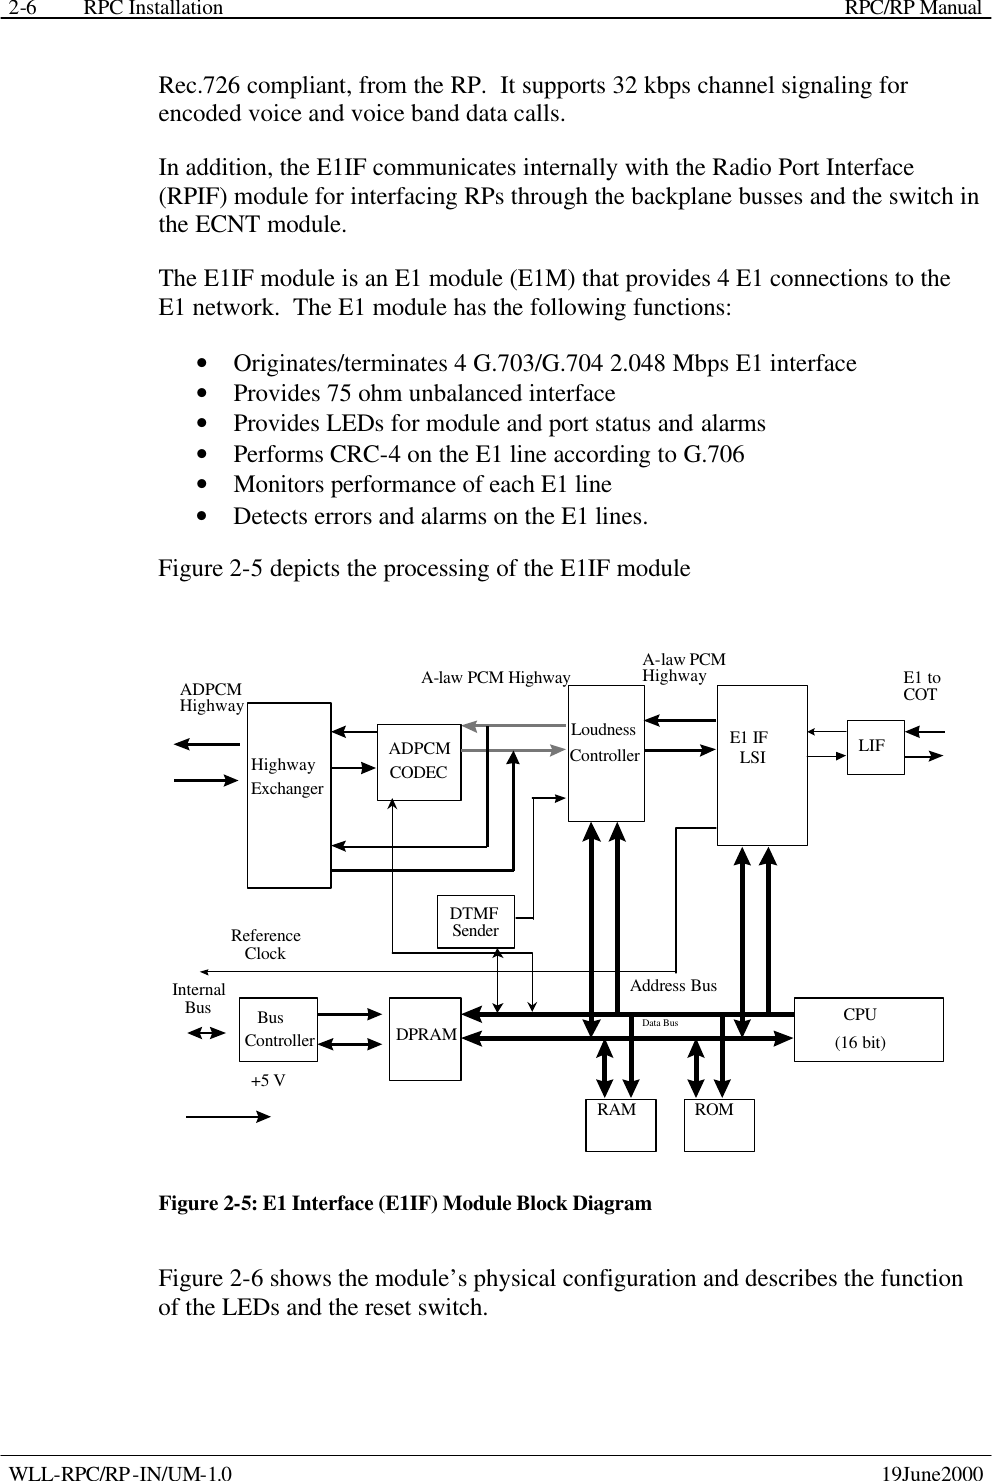 RPC Installation    RPC/RP Manual WLL-RPC/RP-IN/UM-1.0    19June2000 2-6Rec.726 compliant, from the RP.  It supports 32 kbps channel signaling for encoded voice and voice band data calls. In addition, the E1IF communicates internally with the Radio Port Interface (RPIF) module for interfacing RPs through the backplane busses and the switch in the ECNT module. The E1IF module is an E1 module (E1M) that provides 4 E1 connections to the E1 network.  The E1 module has the following functions: • Originates/terminates 4 G.703/G.704 2.048 Mbps E1 interface  • Provides 75 ohm unbalanced interface • Provides LEDs for module and port status and alarms • Performs CRC-4 on the E1 line according to G.706 • Monitors performance of each E1 line • Detects errors and alarms on the E1 lines. Figure 2-5 depicts the processing of the E1IF module HighwayExchangerADPCMCODECLoudnessControllerADPCMHighwayE1 IFLSI LIFA-law PCM Highway A-law PCMHighway E1 toCOTBusController DPRAM CPU(16 bit)DTMFSenderReferenceClock+5 VInternalBusRAM ROMAddress BusData Bus Figure 2-5: E1 Interface (E1IF) Module Block Diagram Figure 2-6 shows the module’s physical configuration and describes the function of the LEDs and the reset switch. 